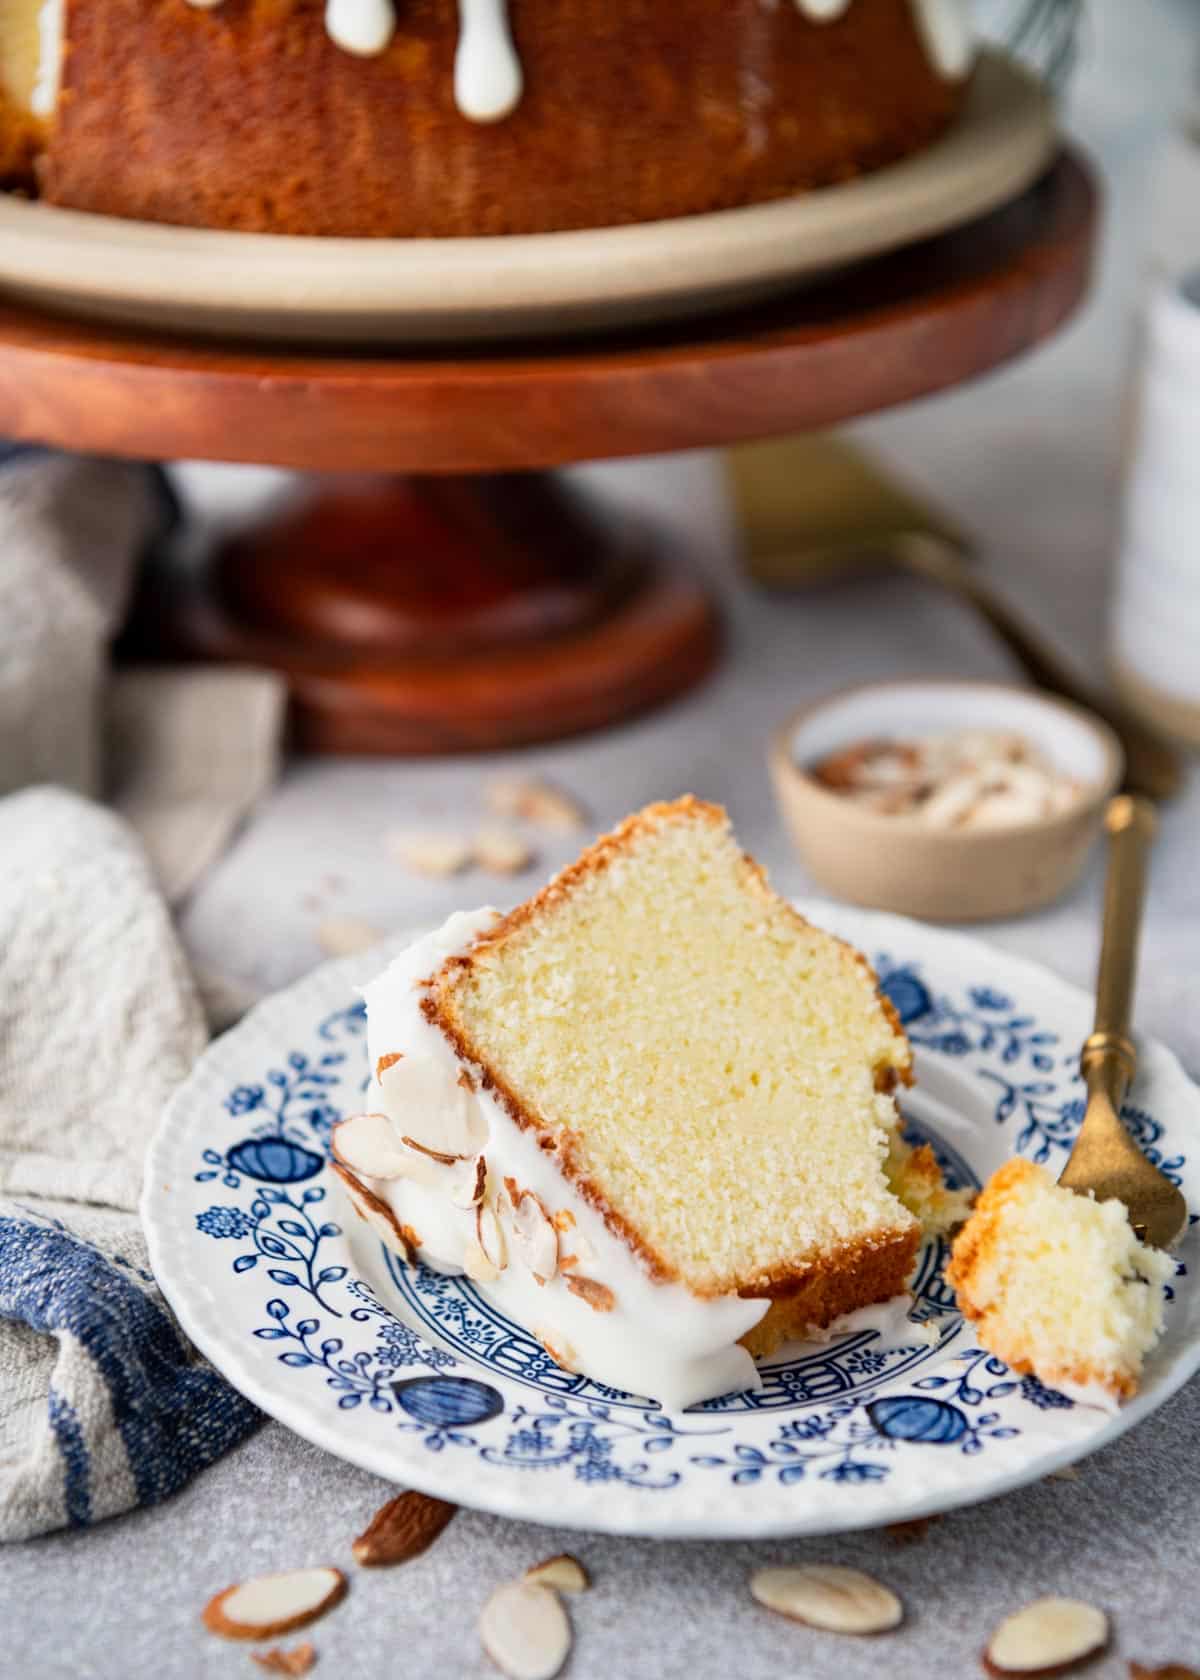 Slice of almond pound cake on a blue and white plate.